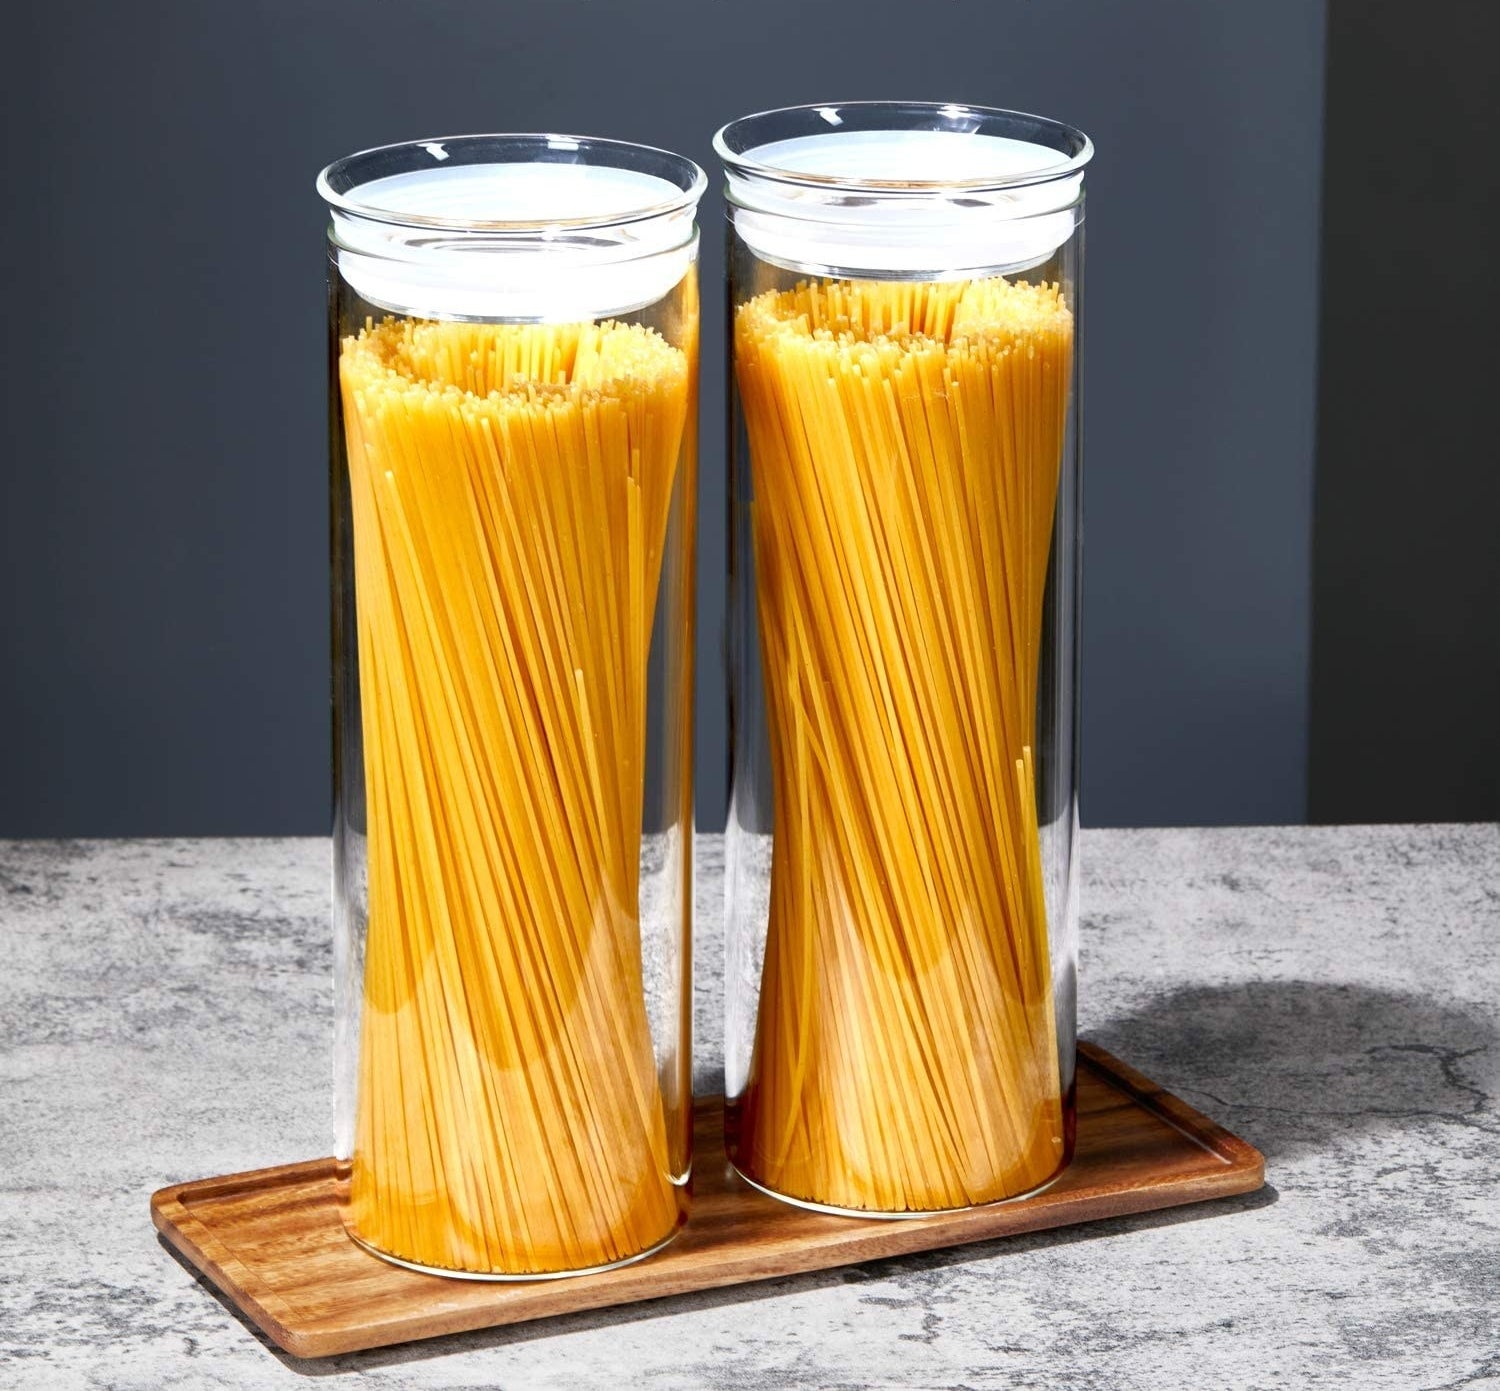 A pair of tall skinny glass canisters filled with spaghetti noodles